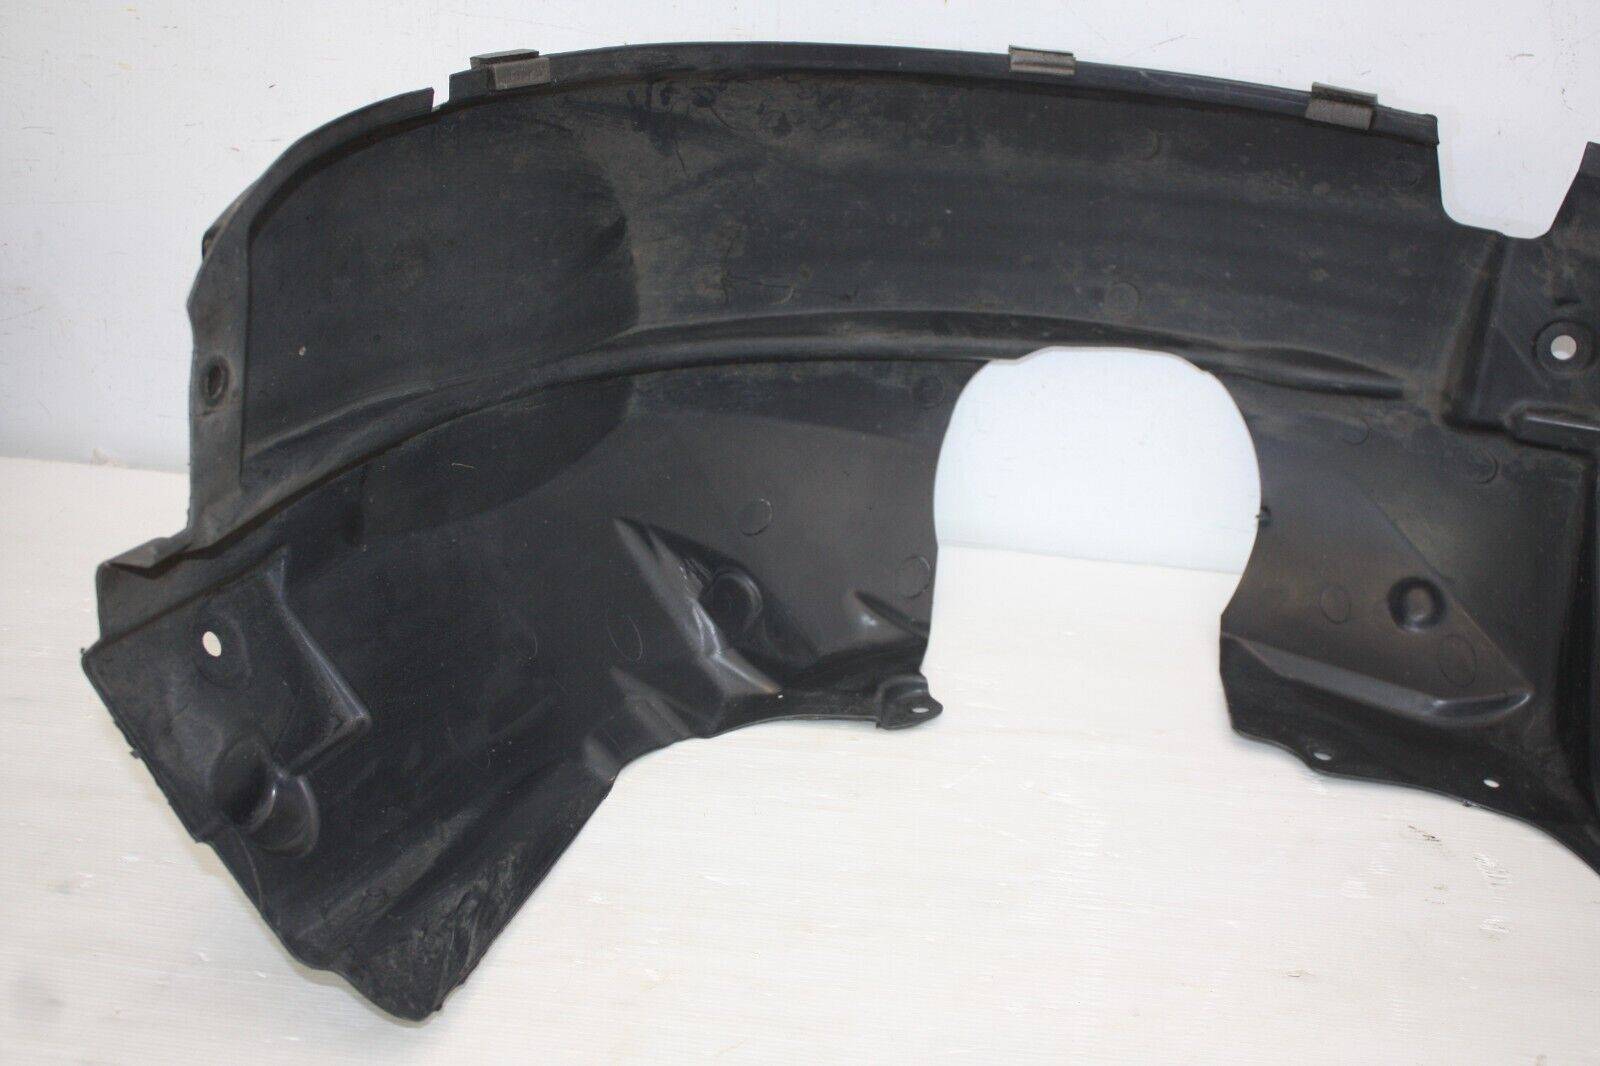 Ford-Fiesta-Front-Right-Side-Wheel-Liner-Splash-Guard-2008-to-2012-8A61-16114-B-175656992480-12